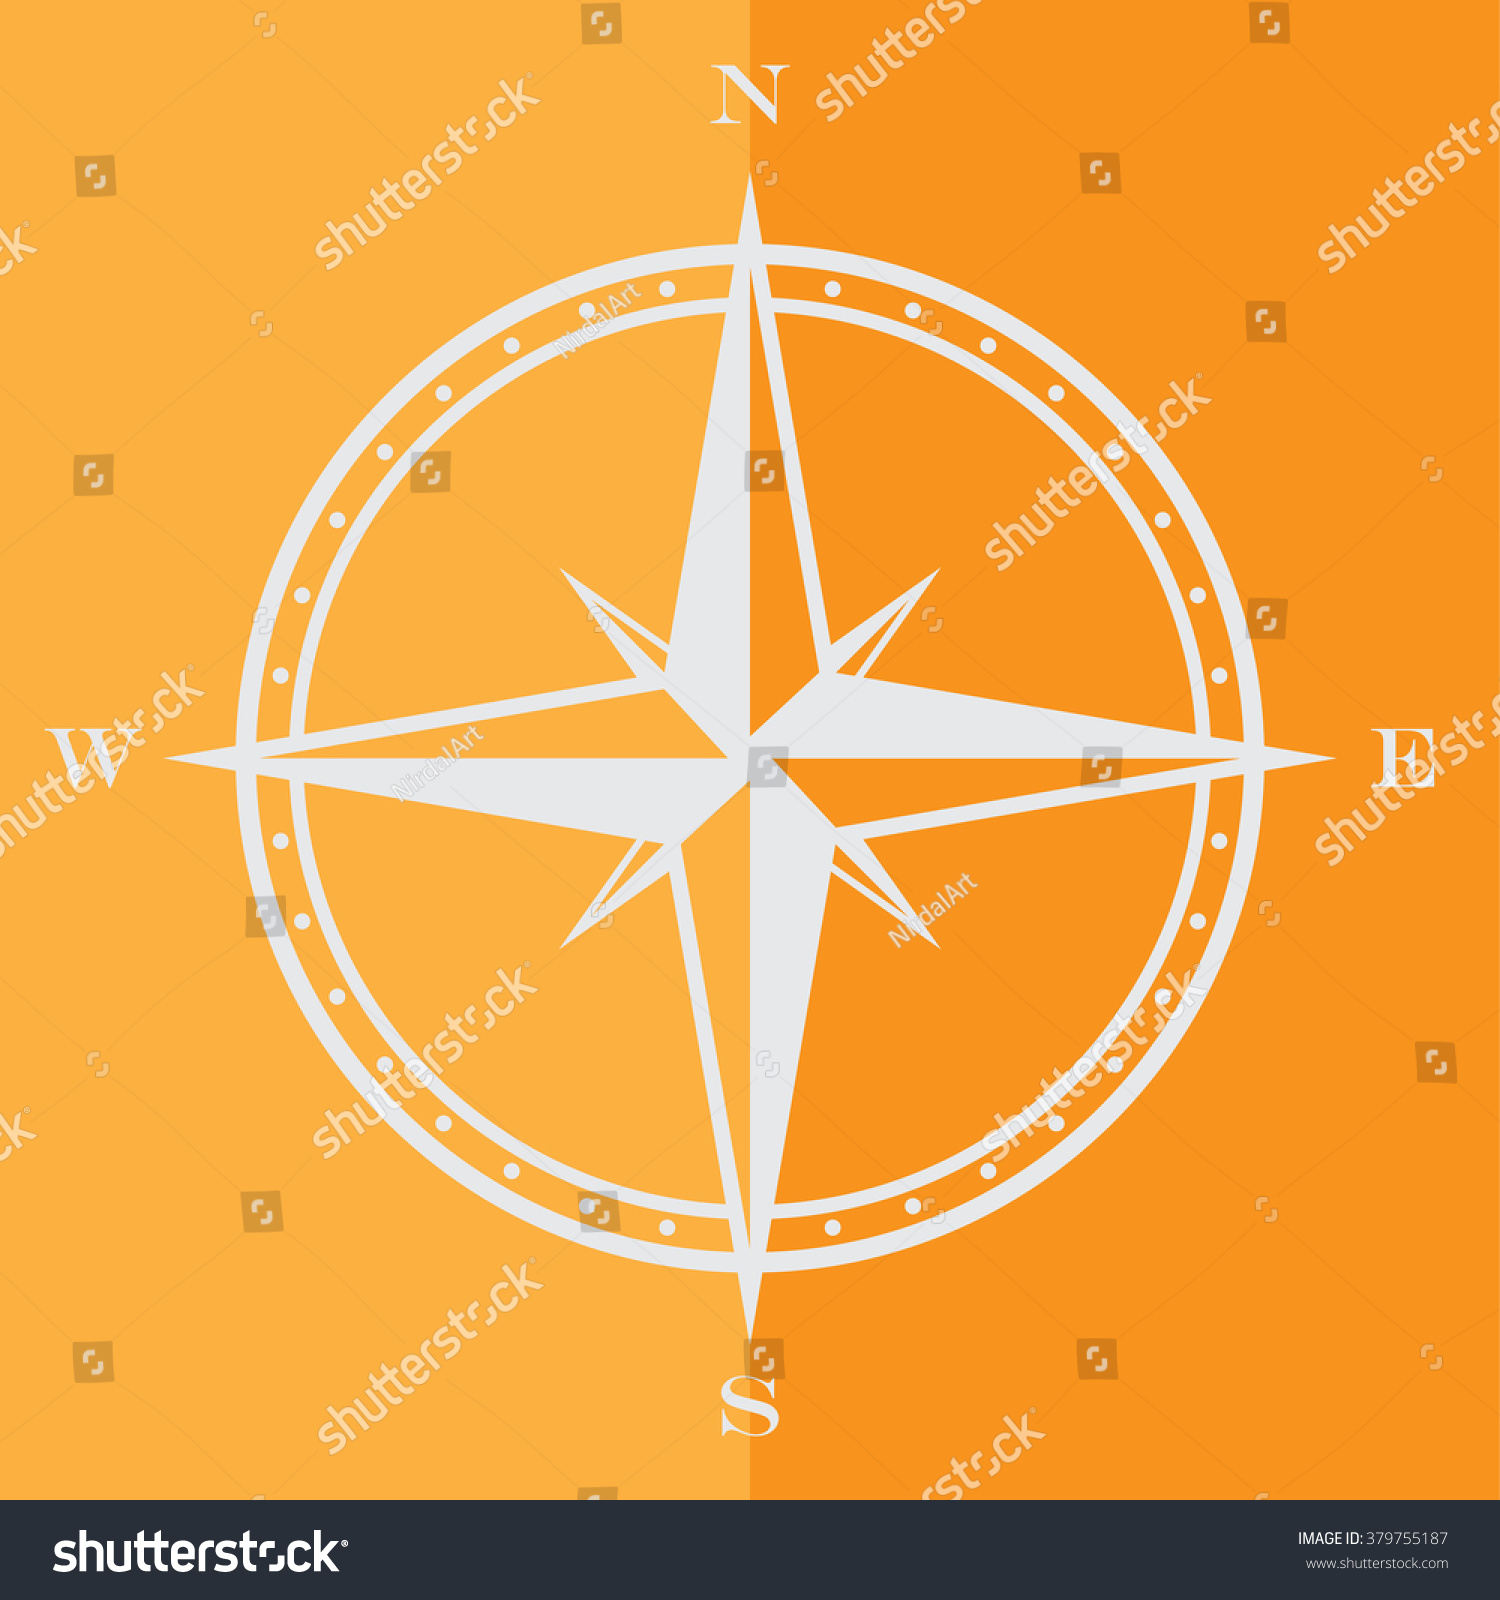 Compass Rose Symbol Stock Vector Royalty Free 379755187 Shutterstock 9860